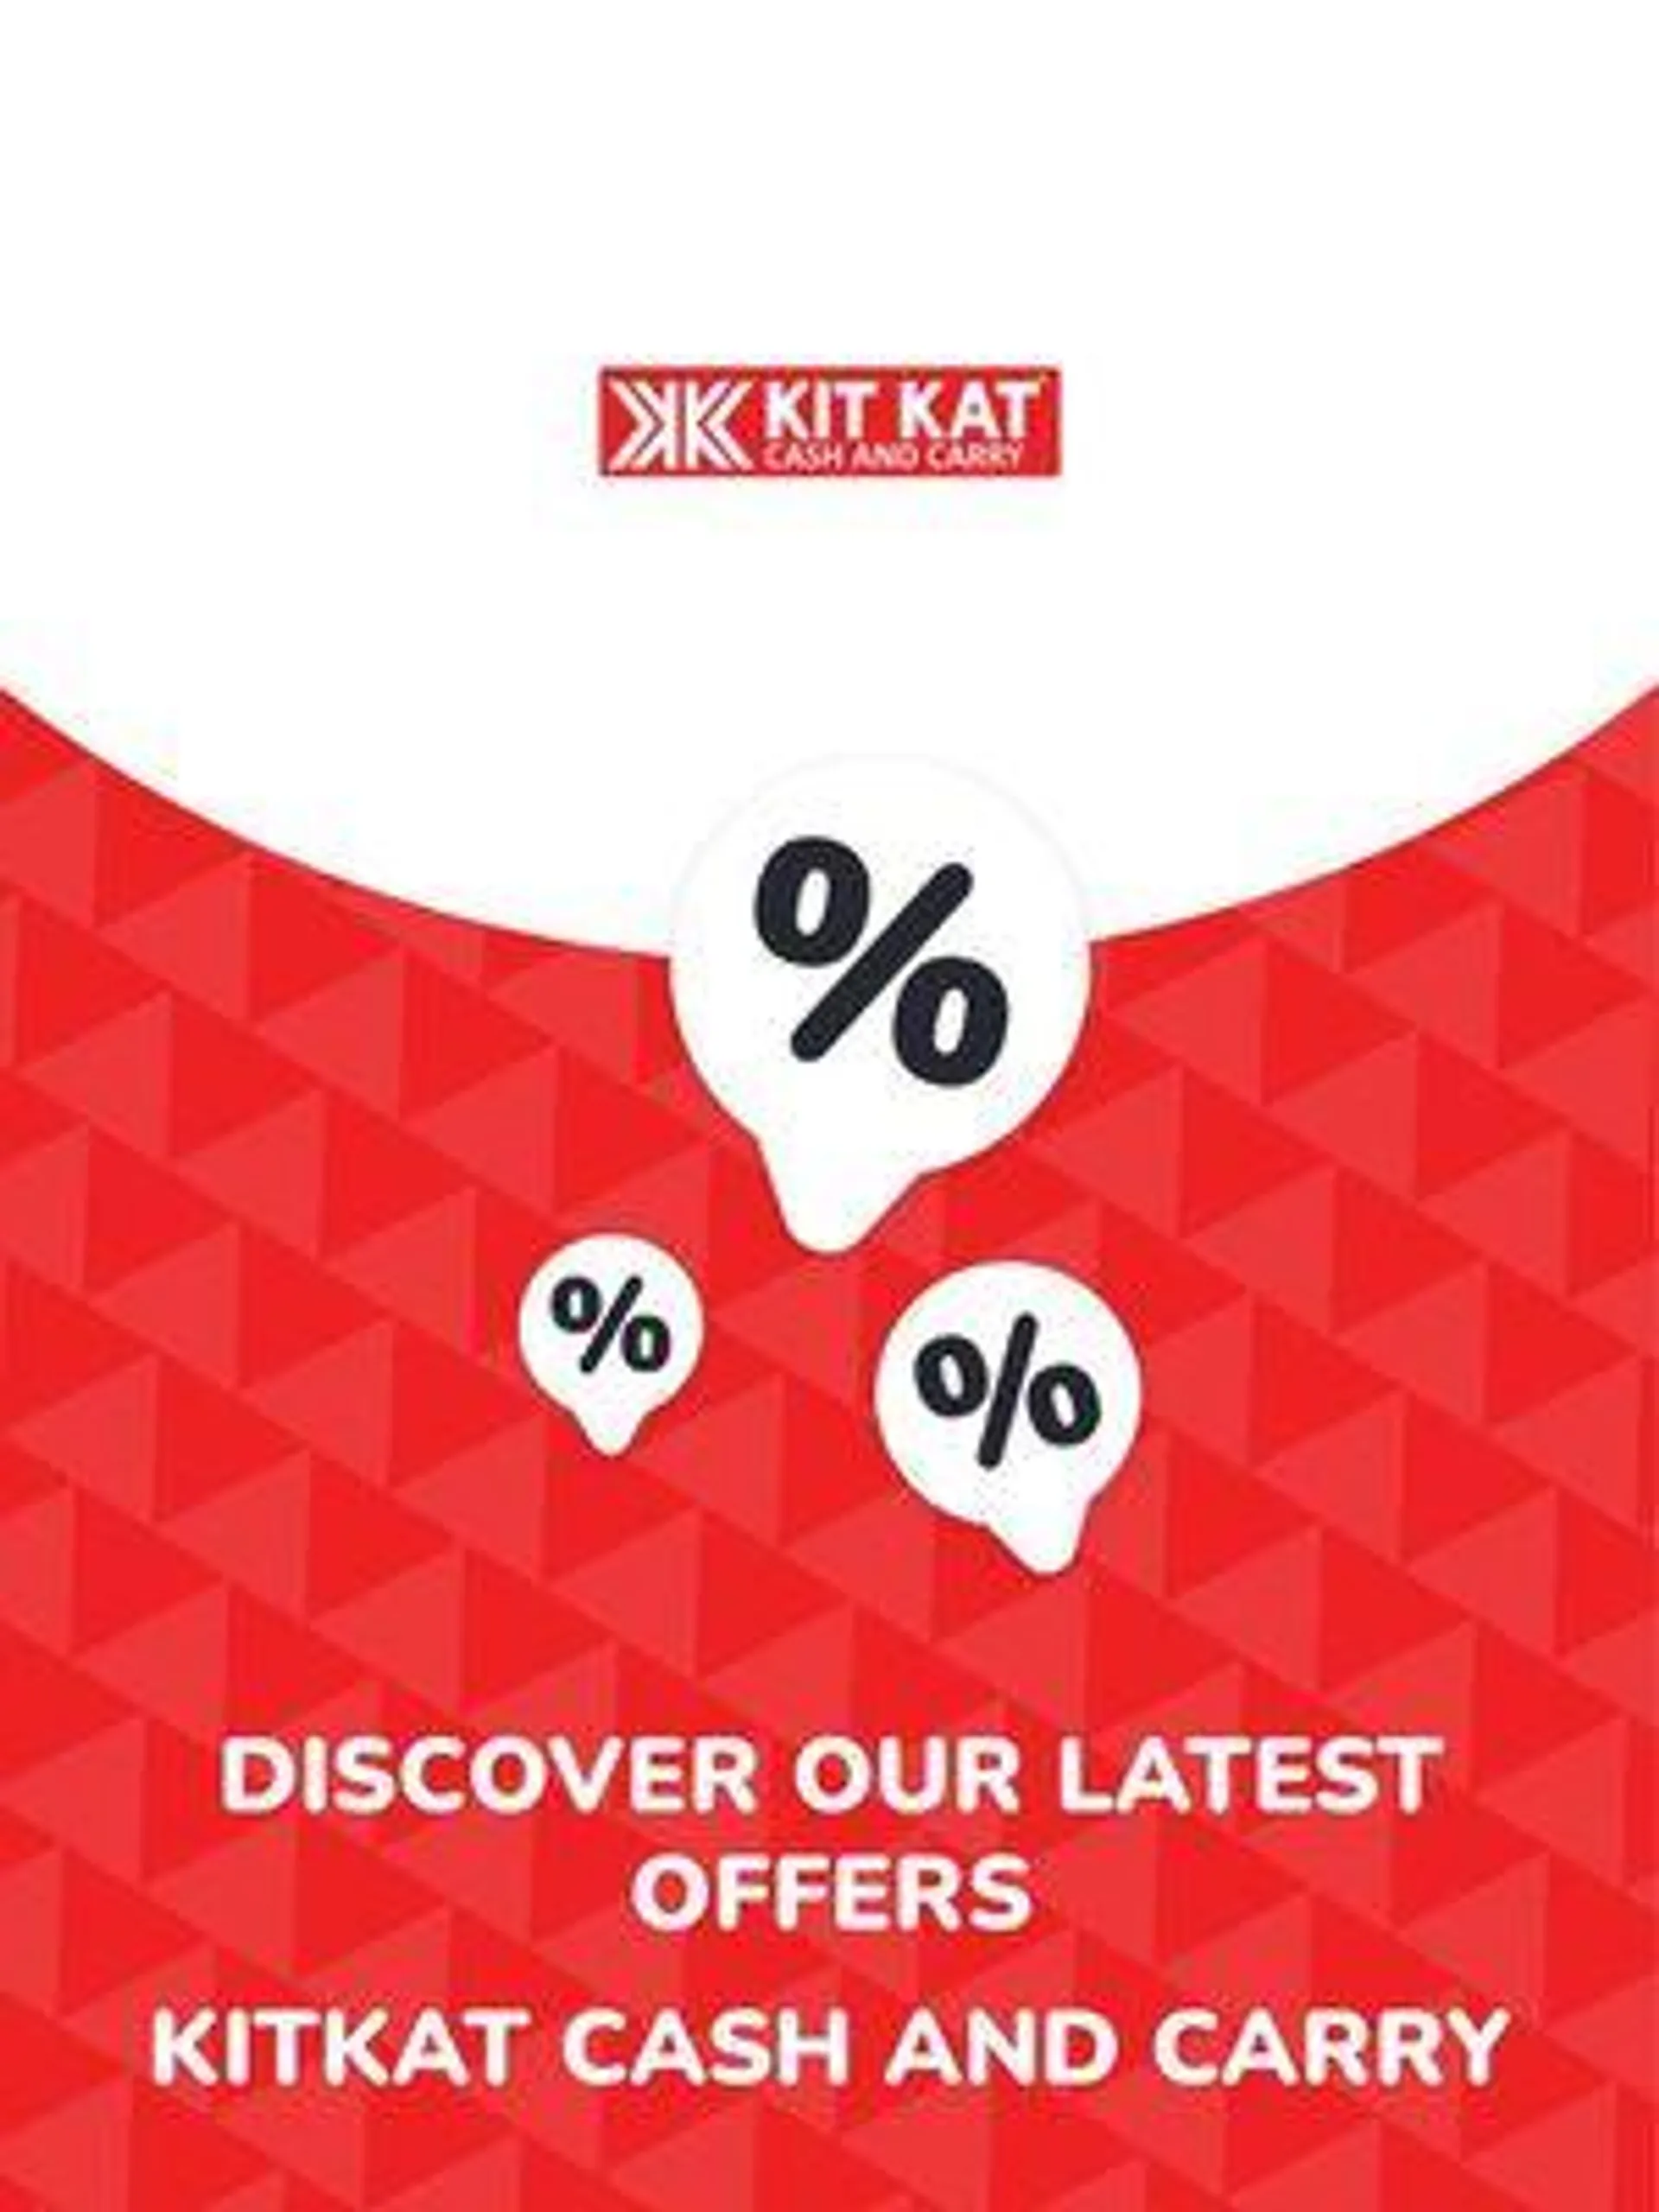 Offers KitKat Cash and Carry - 1